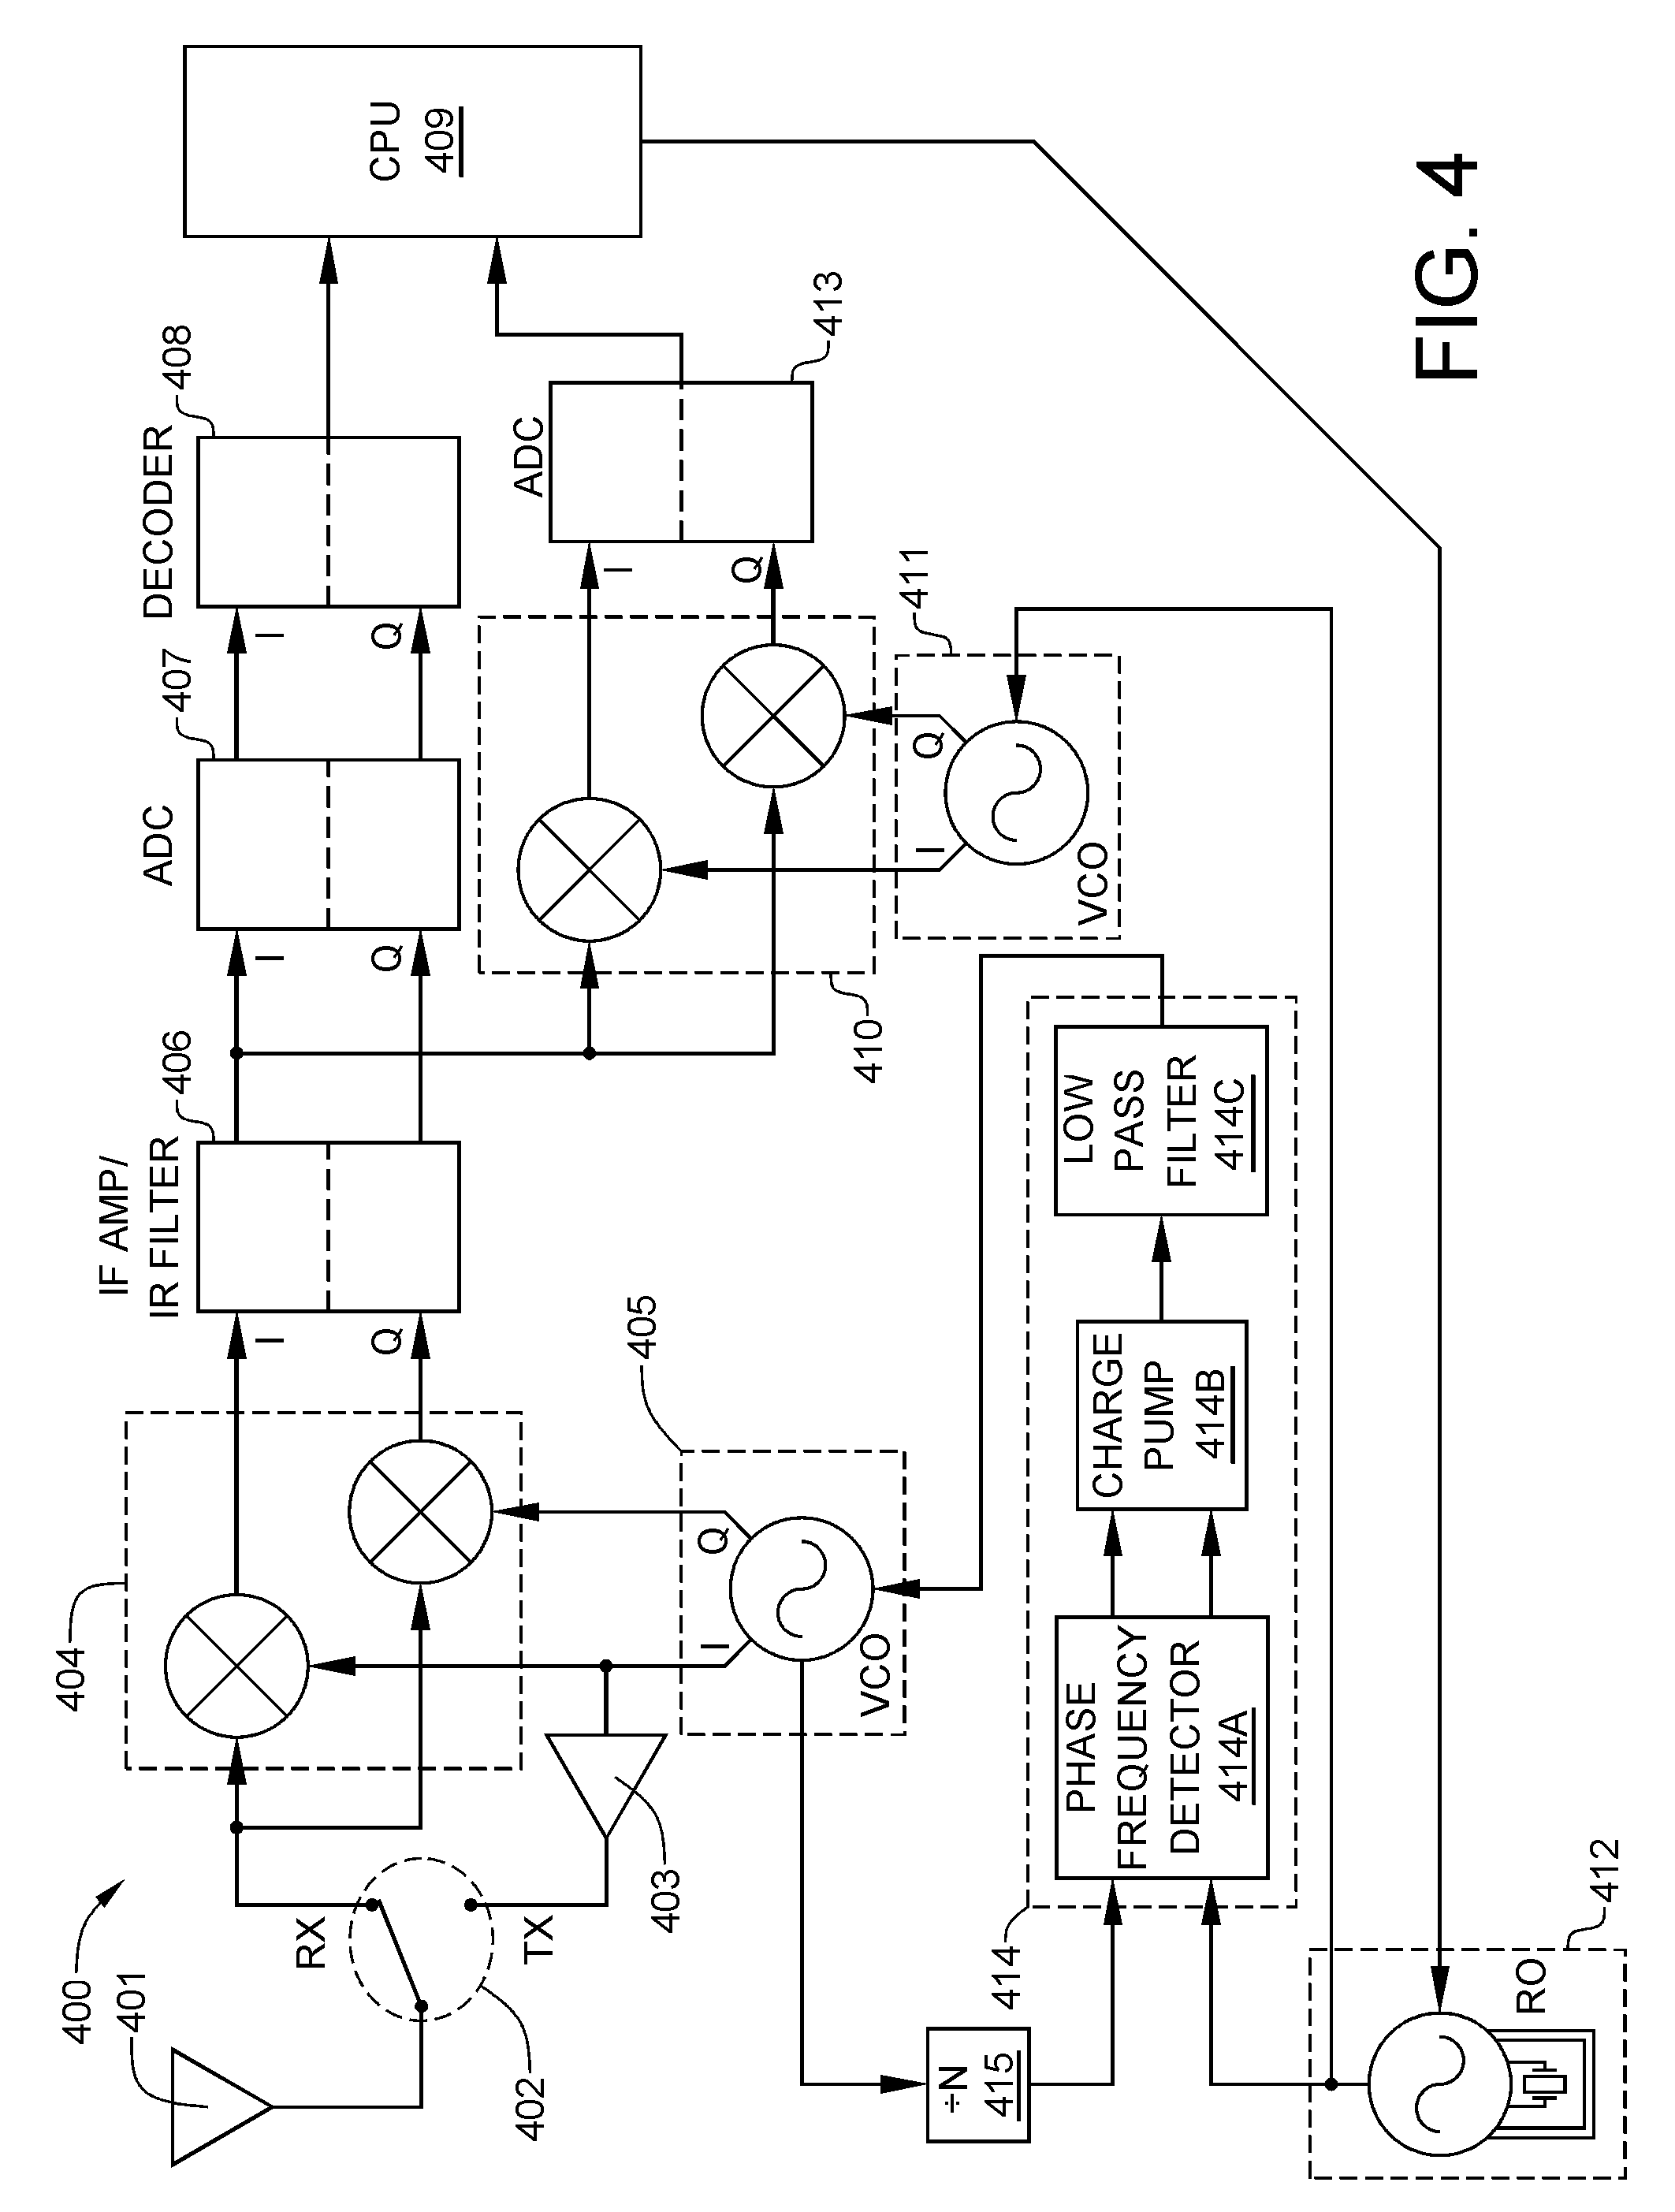 High-resolution, active reflector radio frequency ranging system